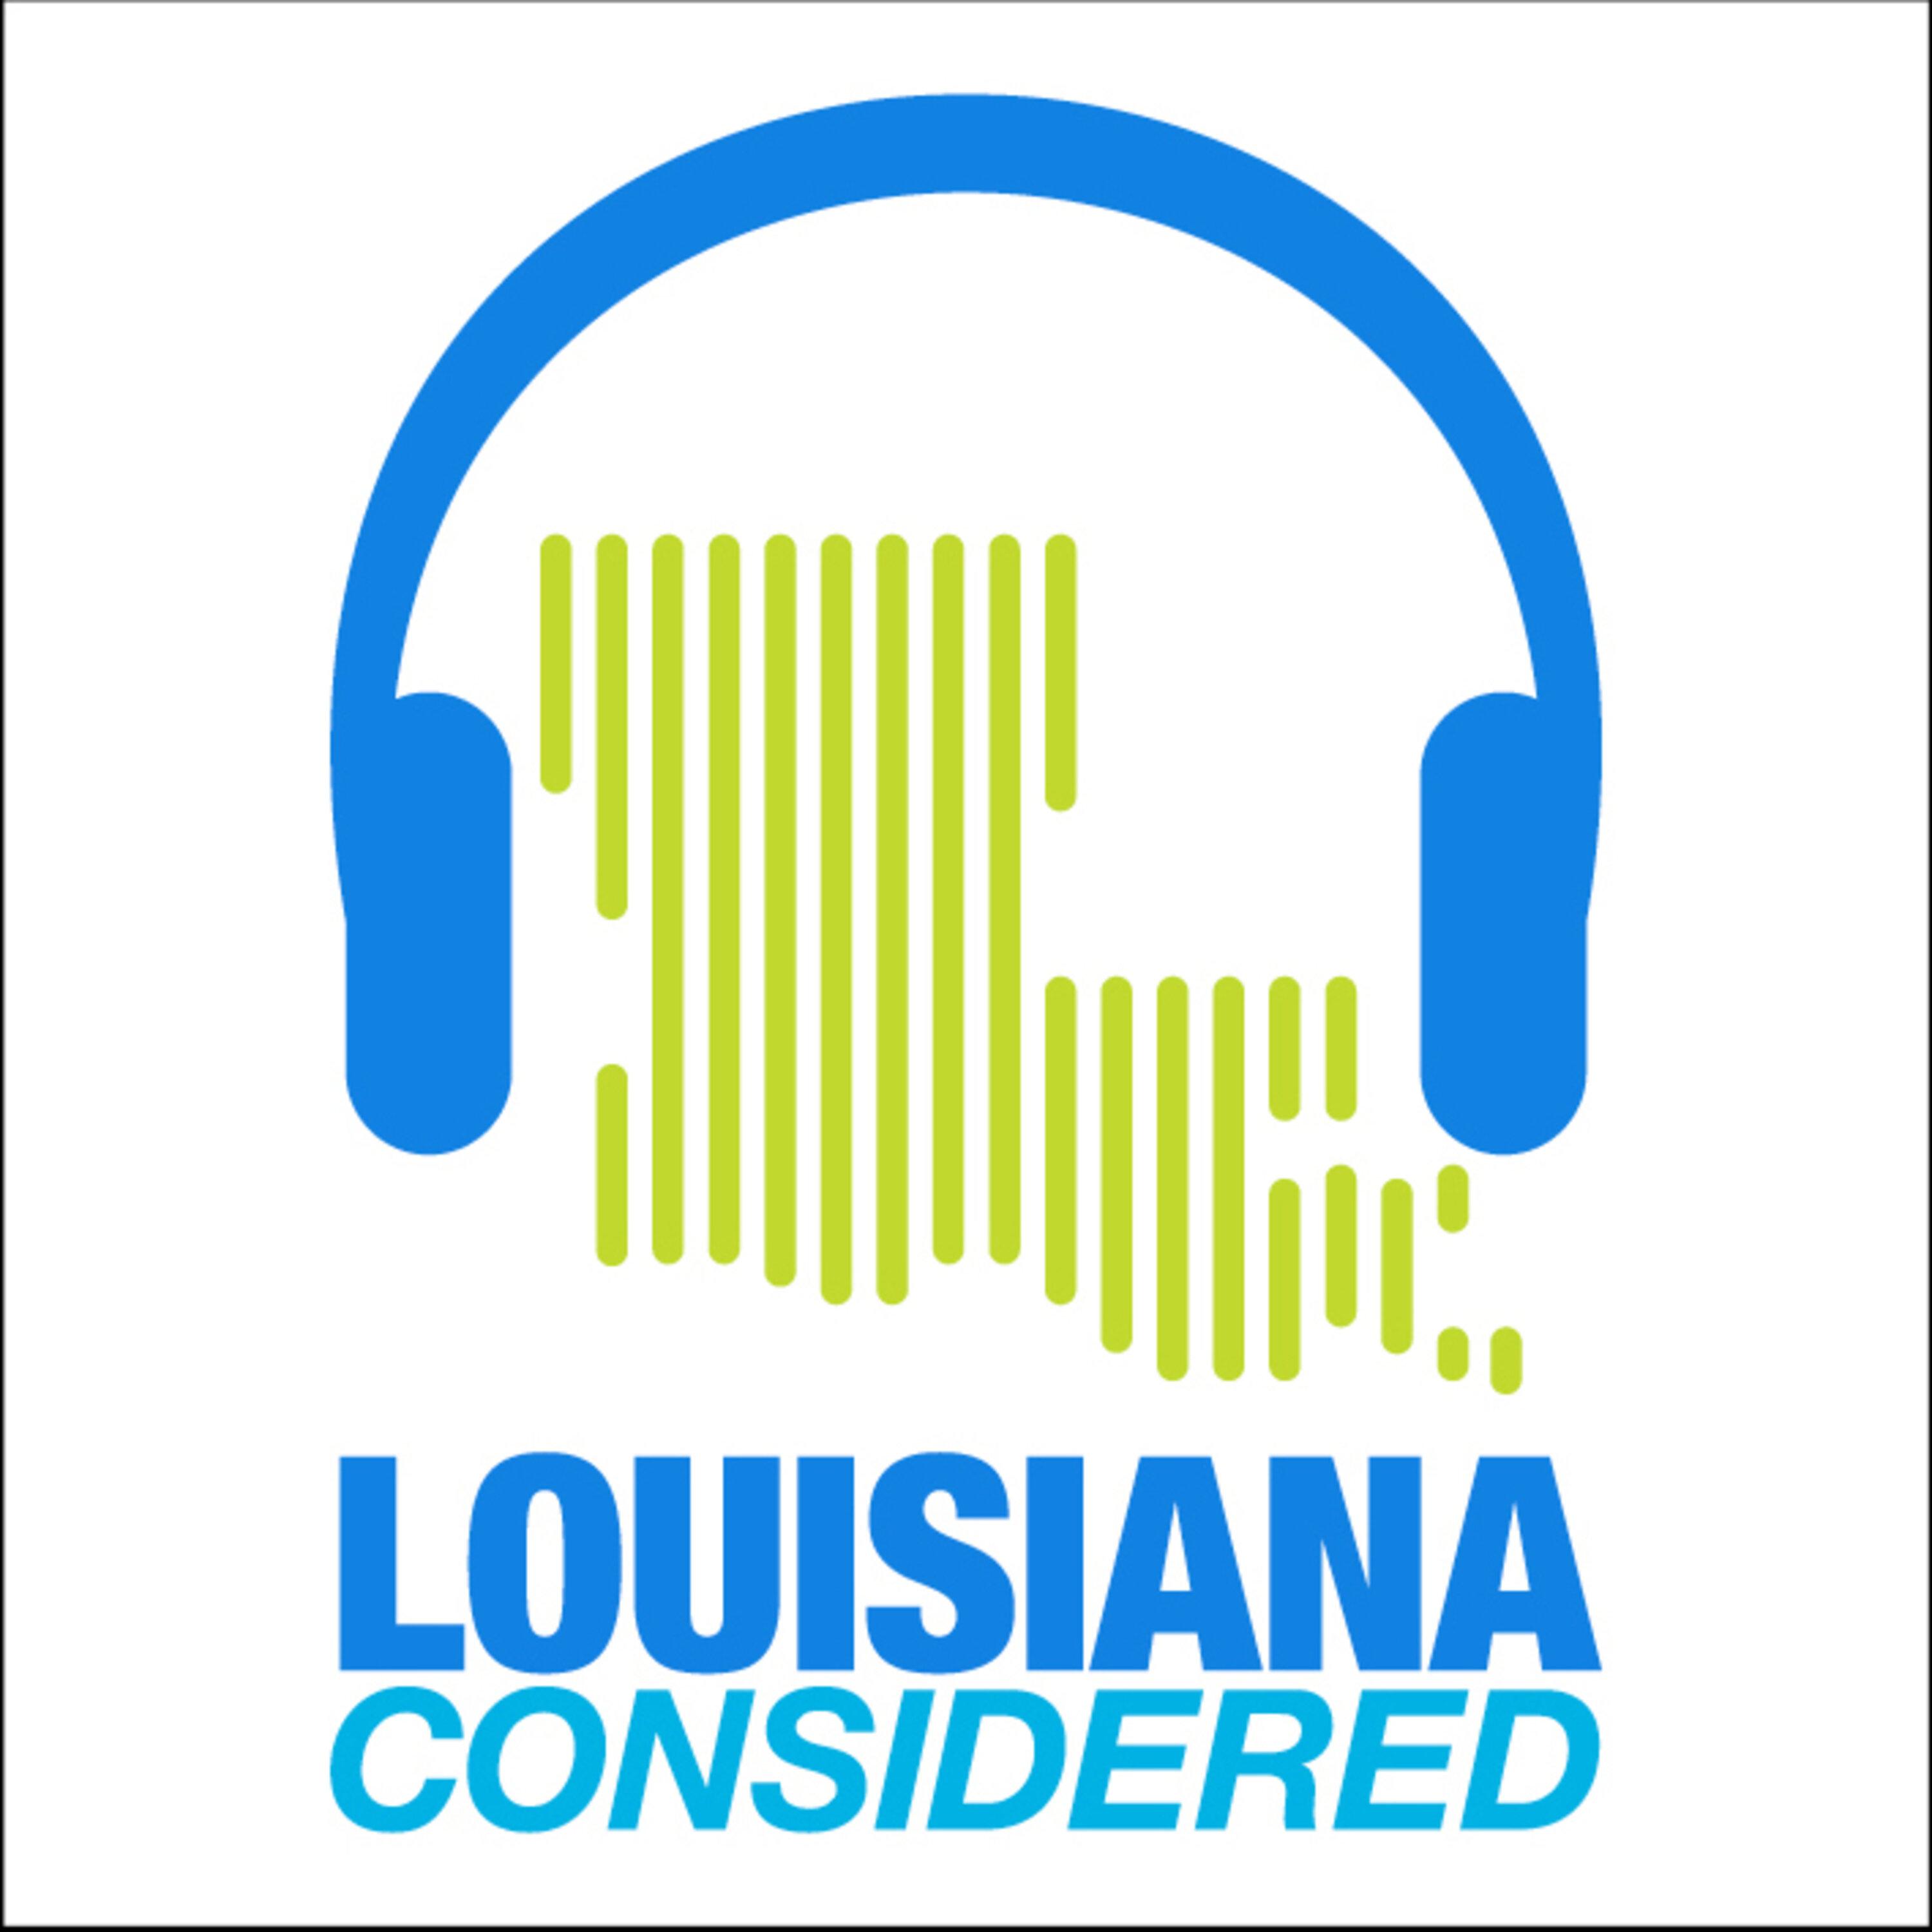 Thumbnail for "Louisiana Considered: Louisiana Educators Brace For New School Year During COVID-19 Case Surge, Tropical Storm Fred Approaches Gulf Coast".